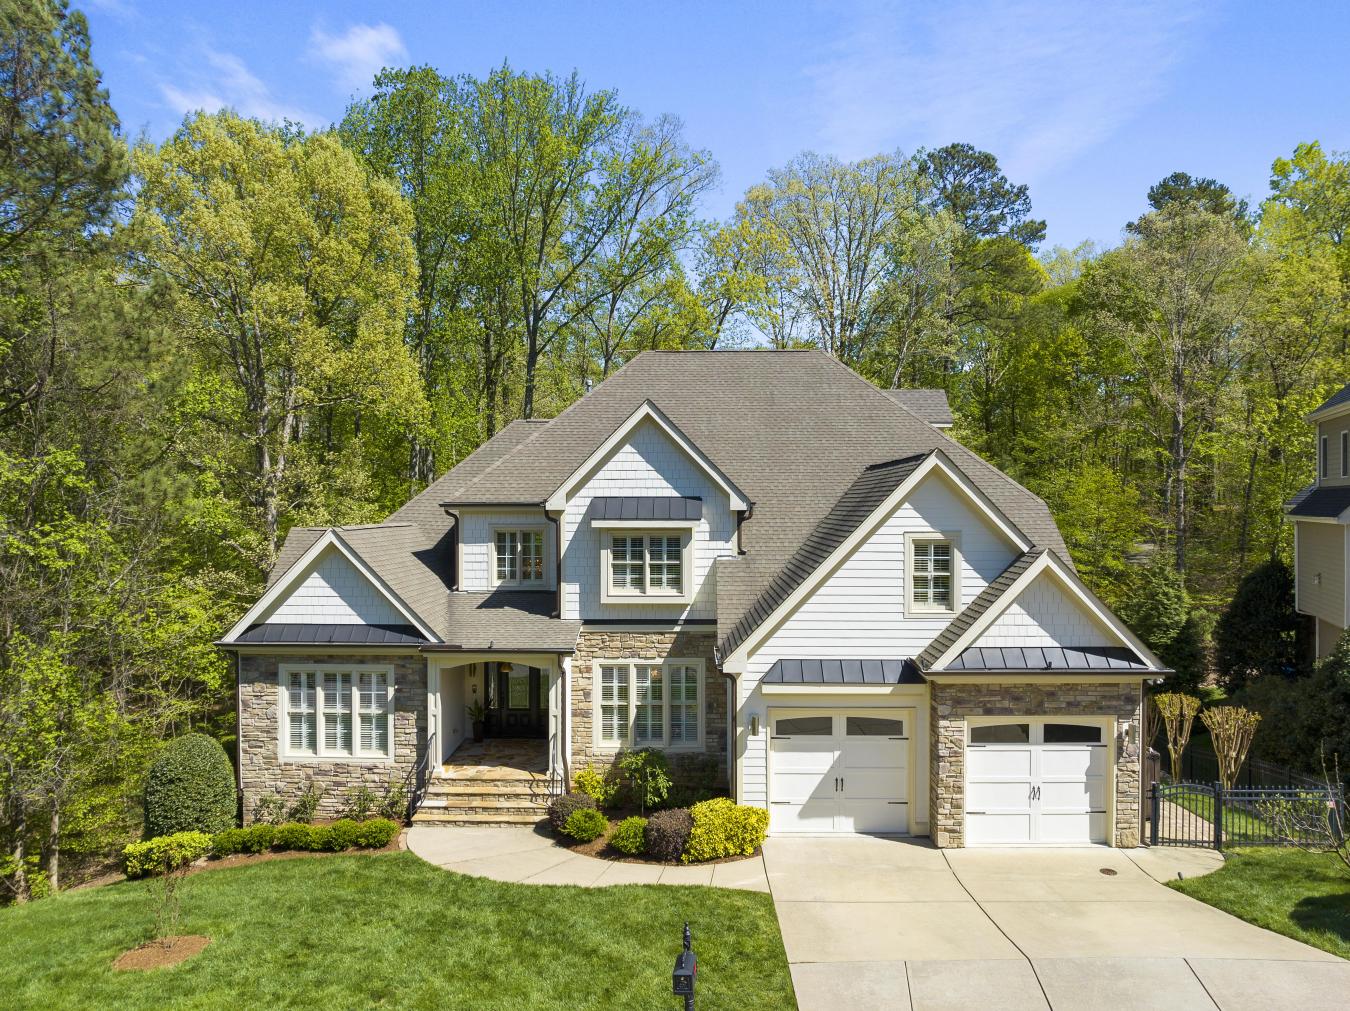 7026 Rippling Stone Lane, Raleigh, North Carolina, 27612, United States, 7 Bedrooms Bedrooms, ,6 BathroomsBathrooms,Residential,For Sale,7026 Rippling Stone Lane,1249350